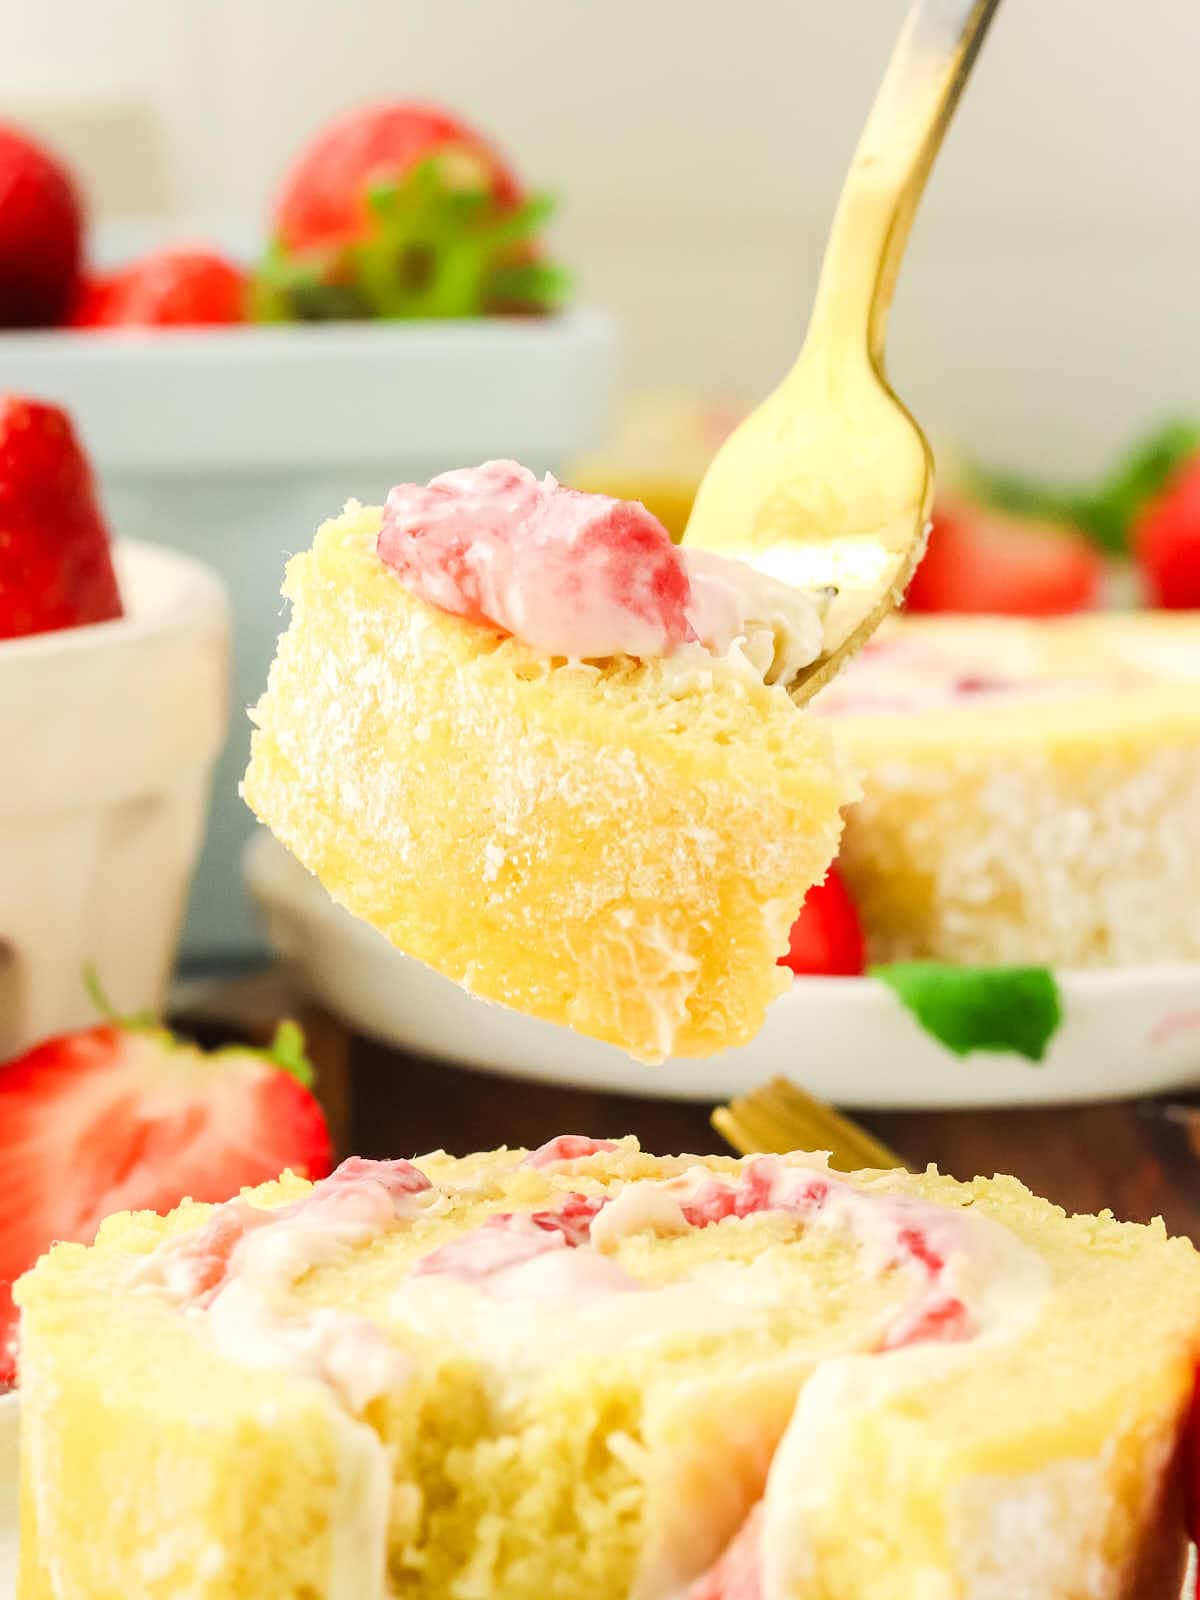 A slice of strawberry roll cake with a spoon.